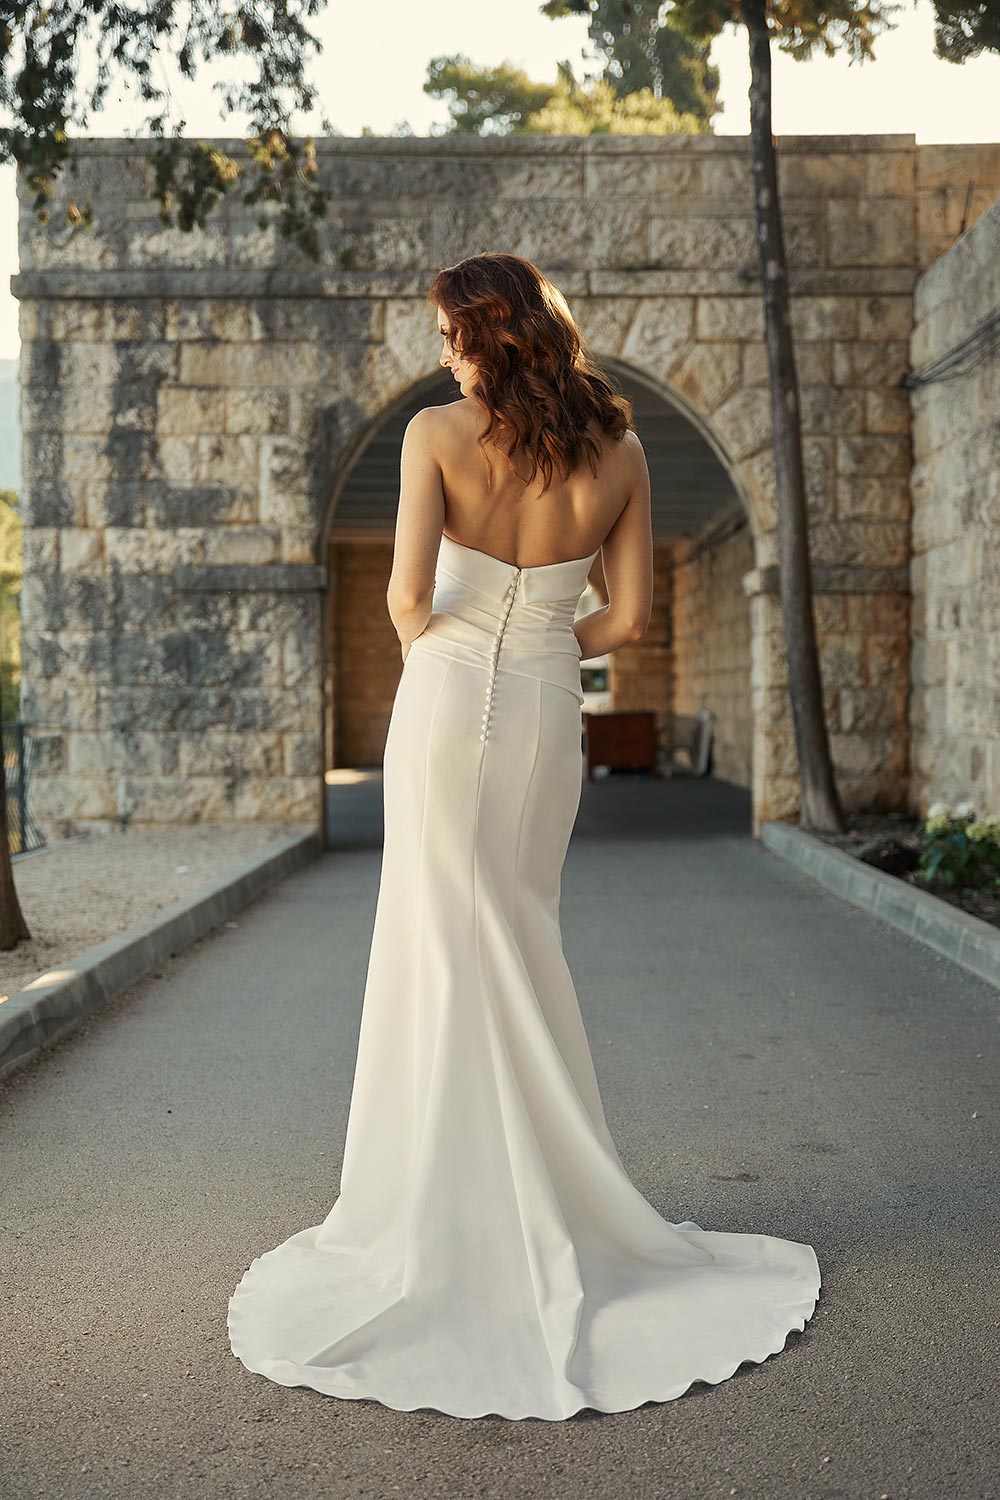 Mara, a minimalist bridal gown with stunning silhouette. Strapless wedding dress in heavyweight Japanese stretch polyester with a seductive split and train. Vinka Design